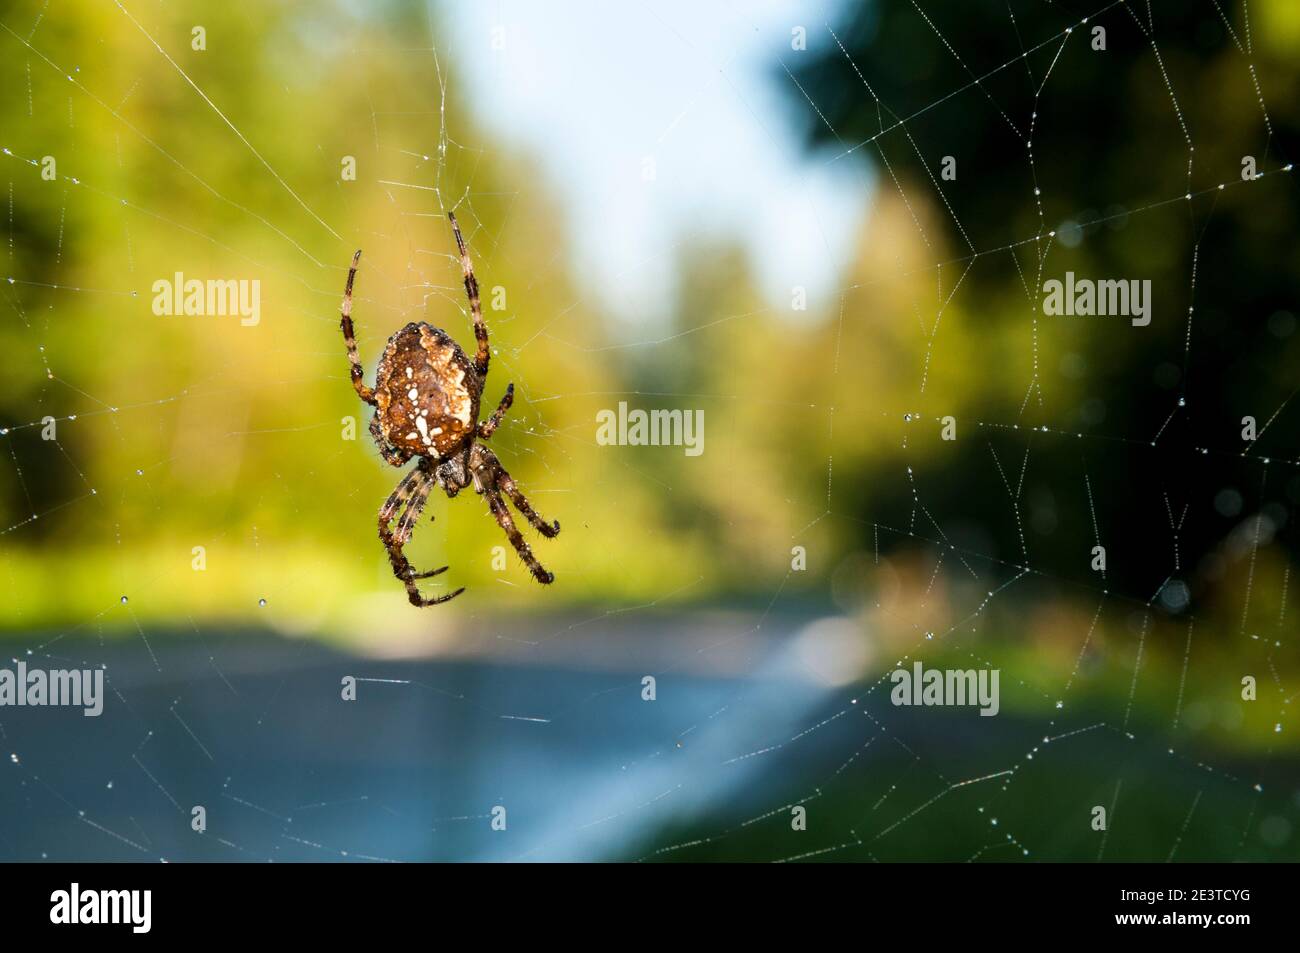 An adult garden spider (Araneus diadematus) suspended in its web next to a road through the Black Forest near Freudenstadt, Baden-Württemberg, Germany Stock Photo